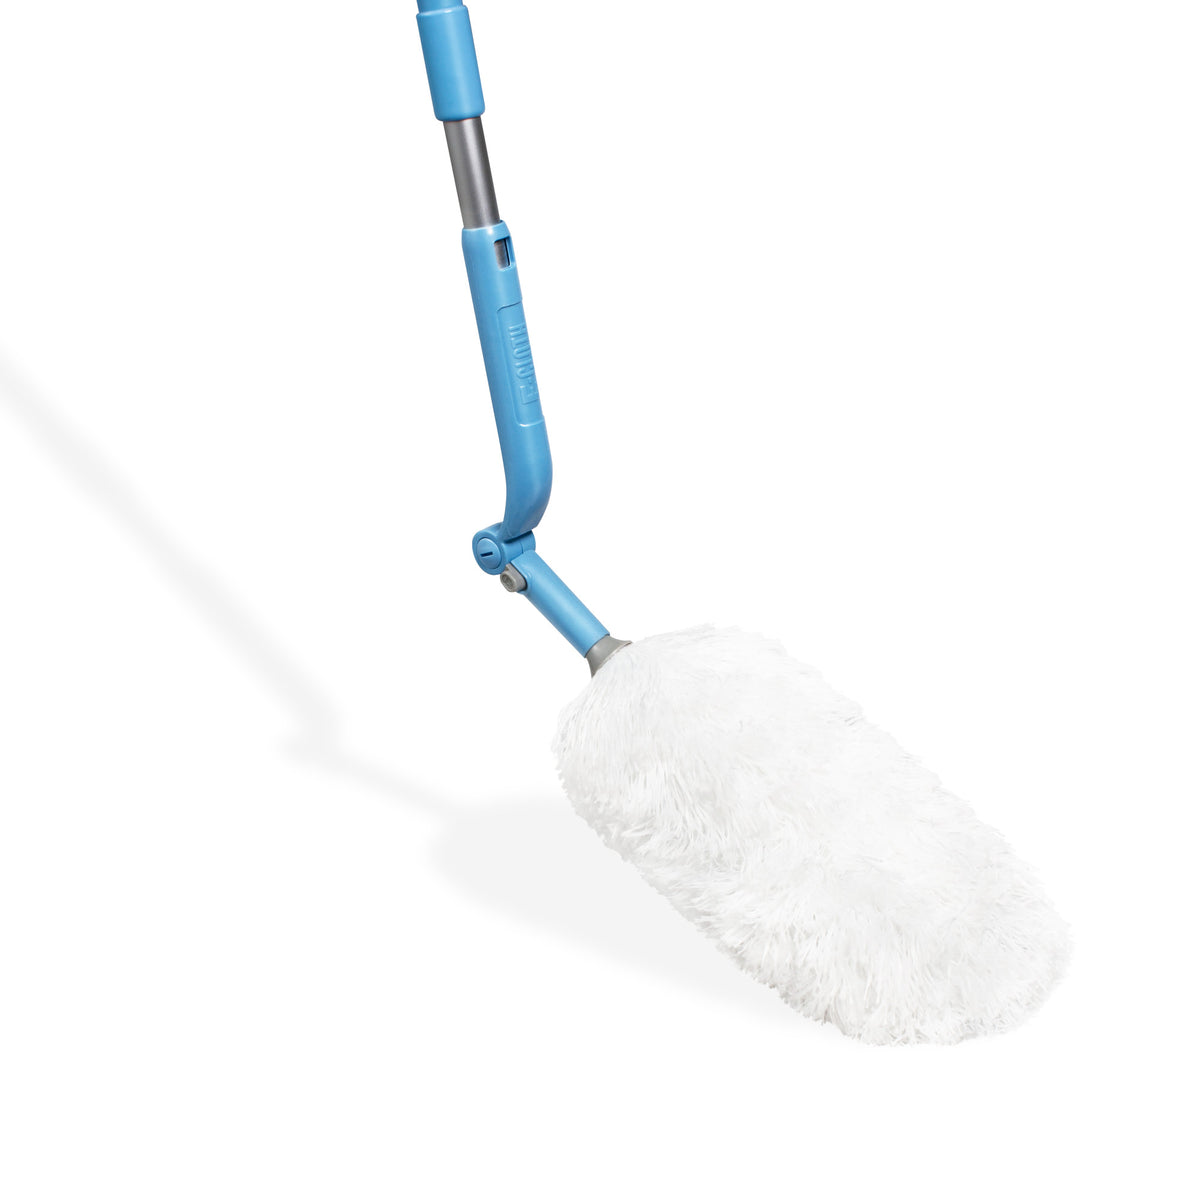 2-in-1 Extendable Duster